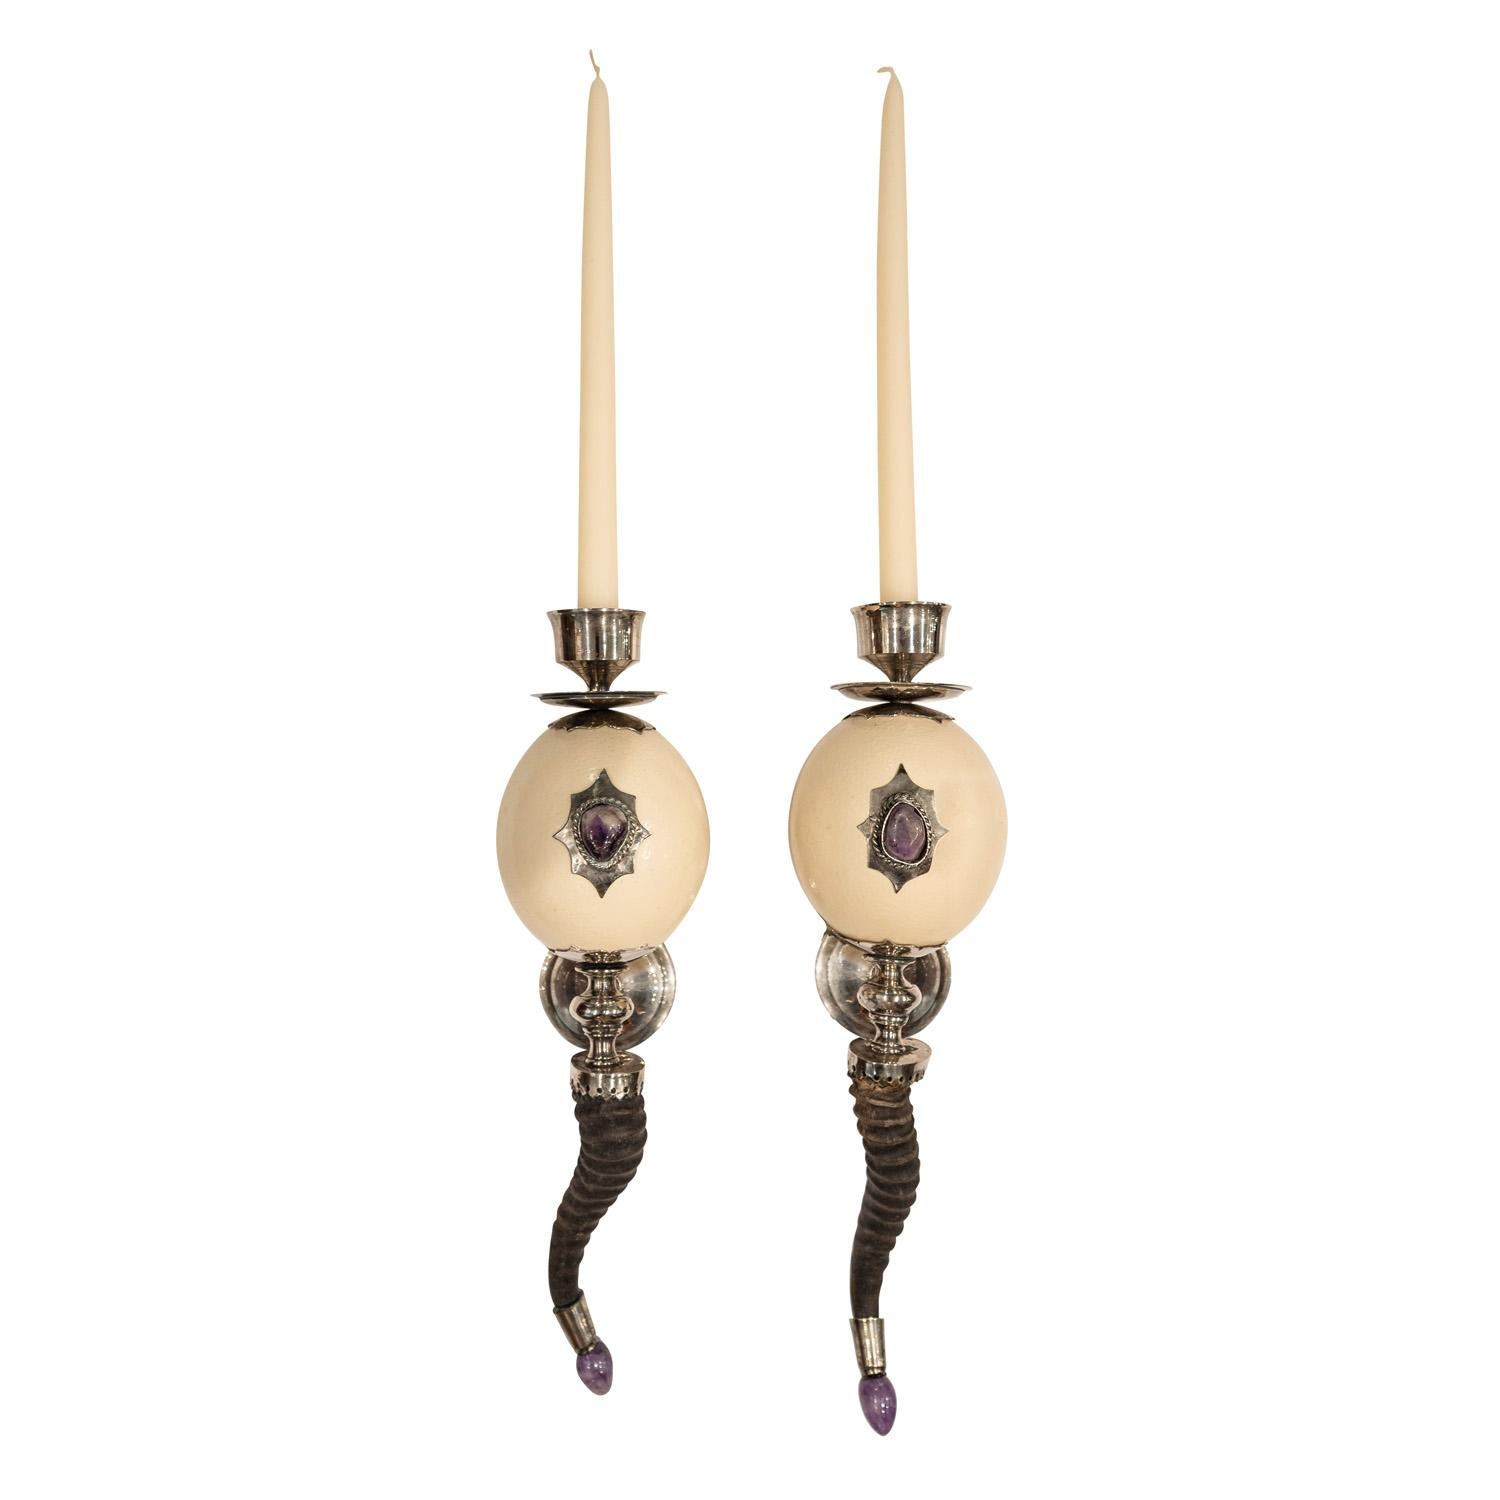 Pair of rare and exceptional sconces in silver with ostrich eggs, amethysts, and animal horns by J. Anthony Redmile, England 1970's (signed in metal 